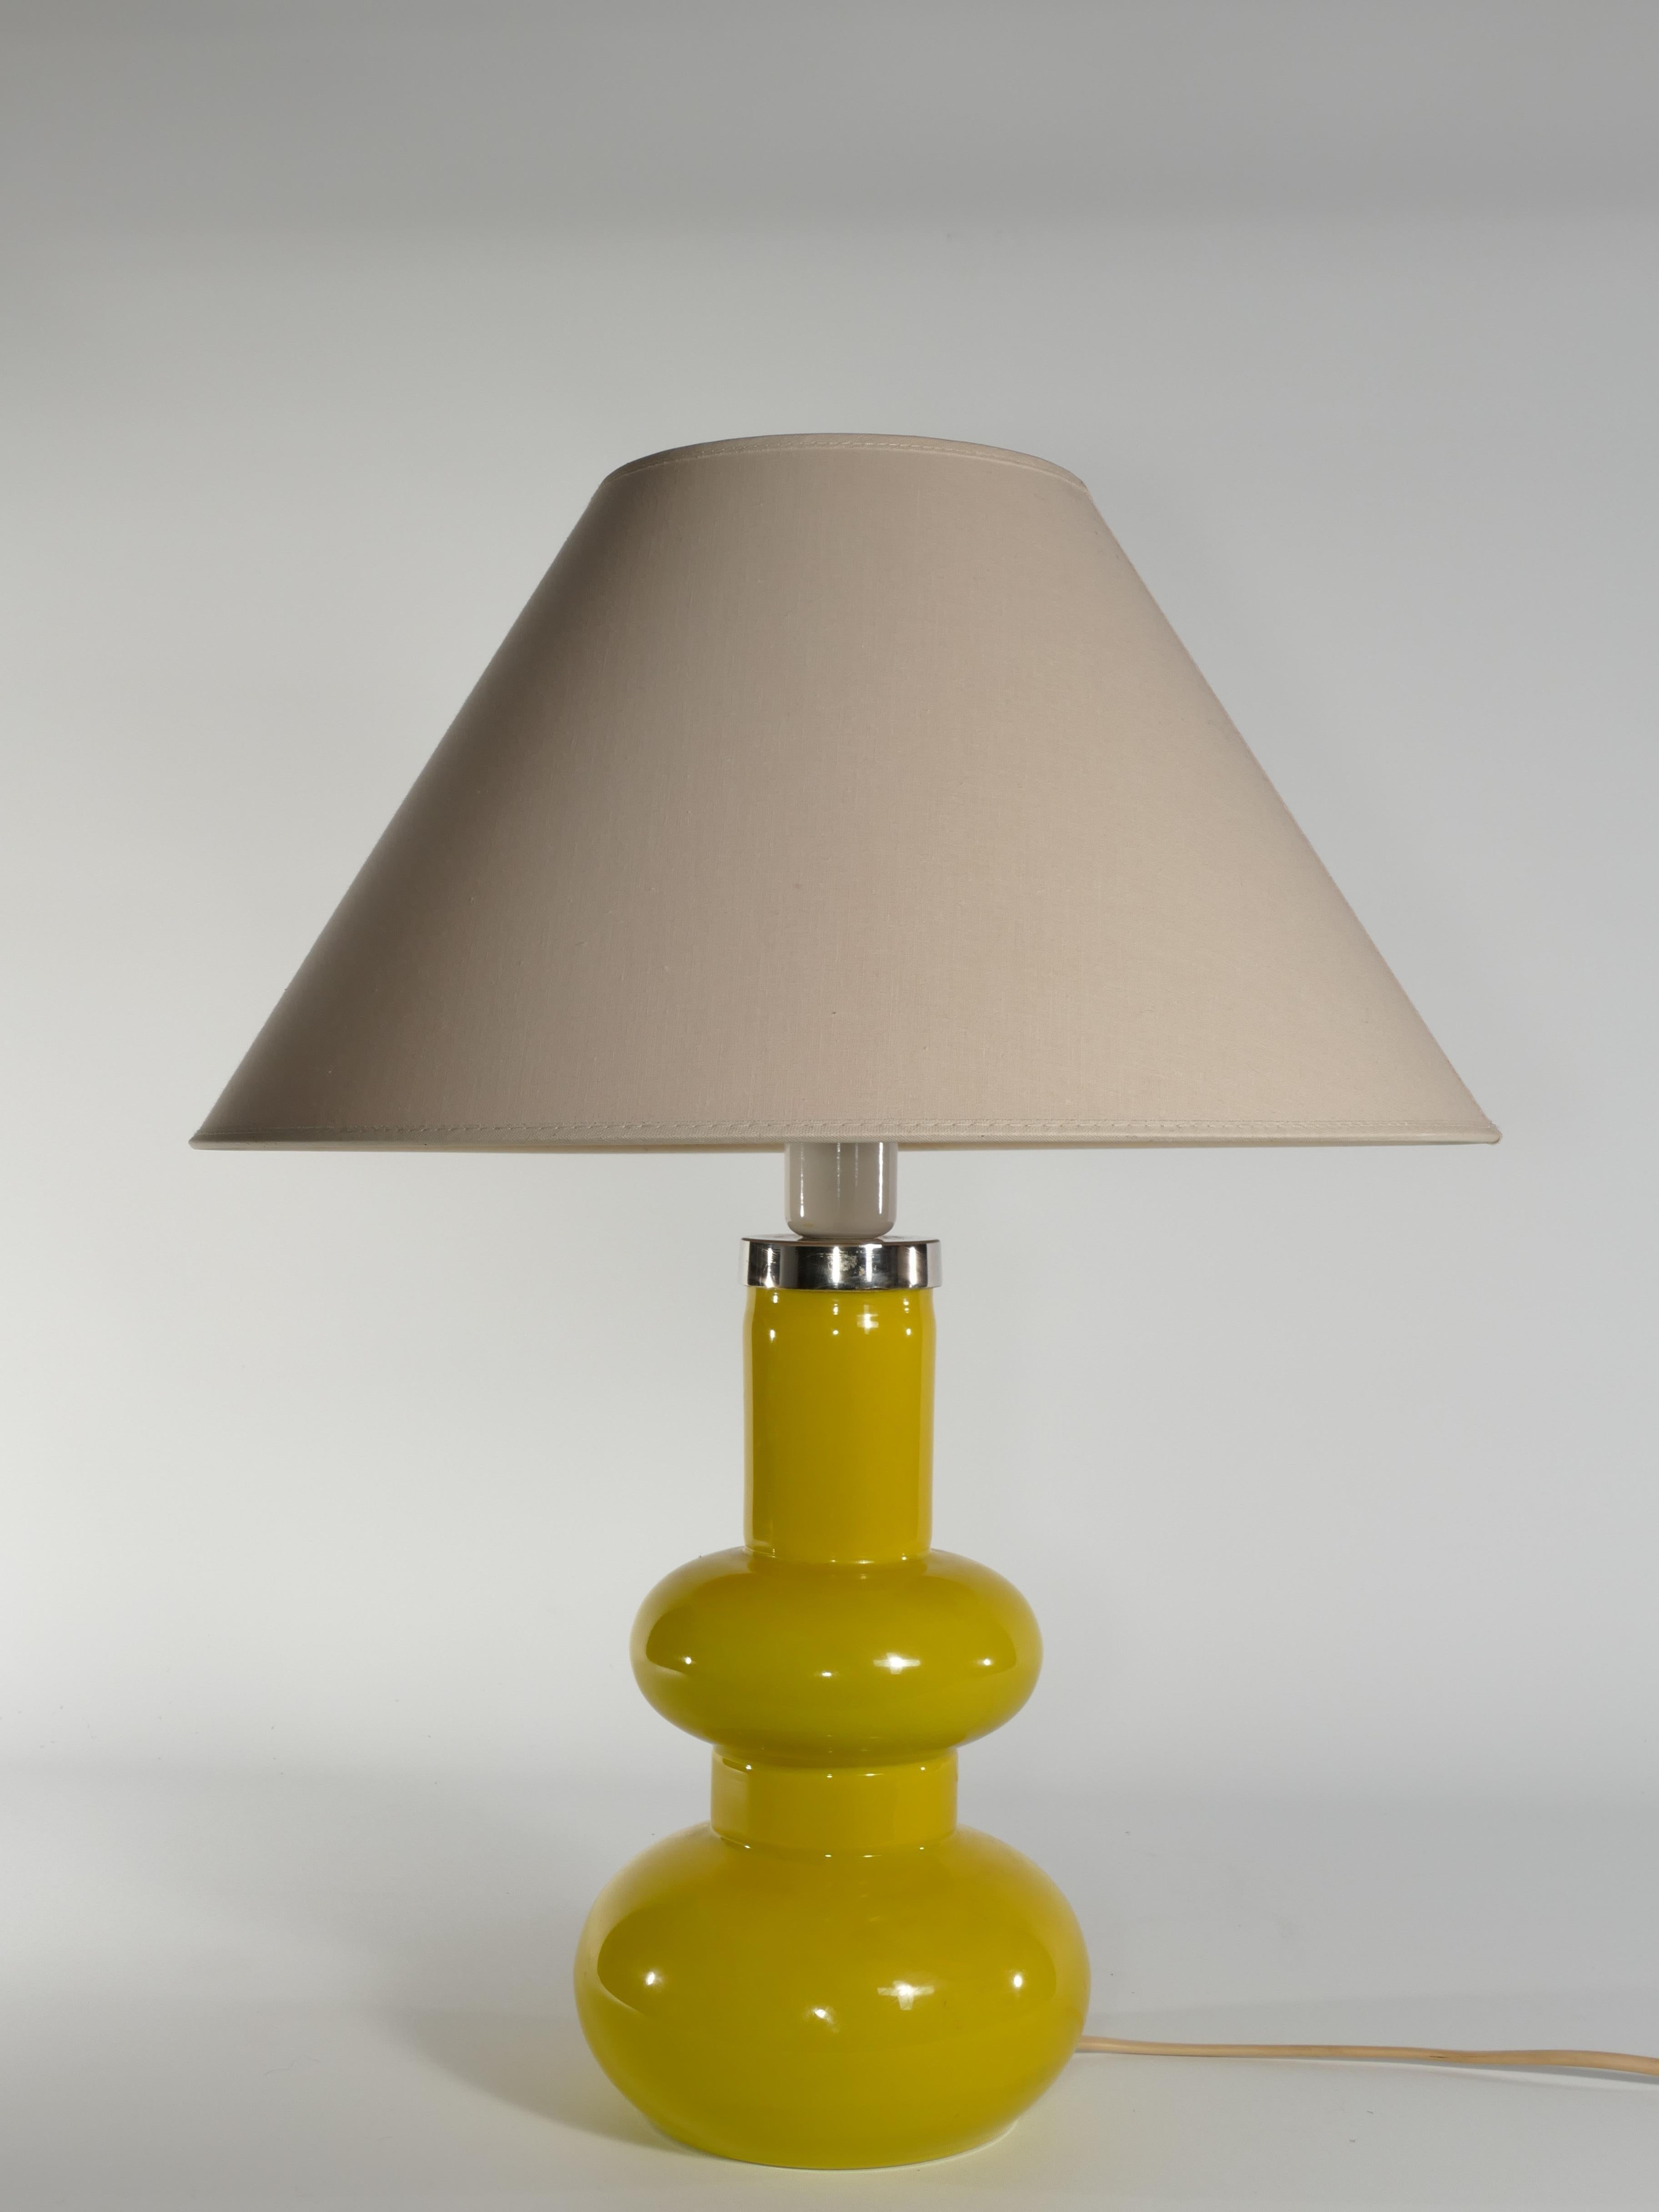 Hand-Crafted Mid-Century Modern Curvaceous Bright Yellow Glass Table Lamp by Orrefors, 1960s For Sale